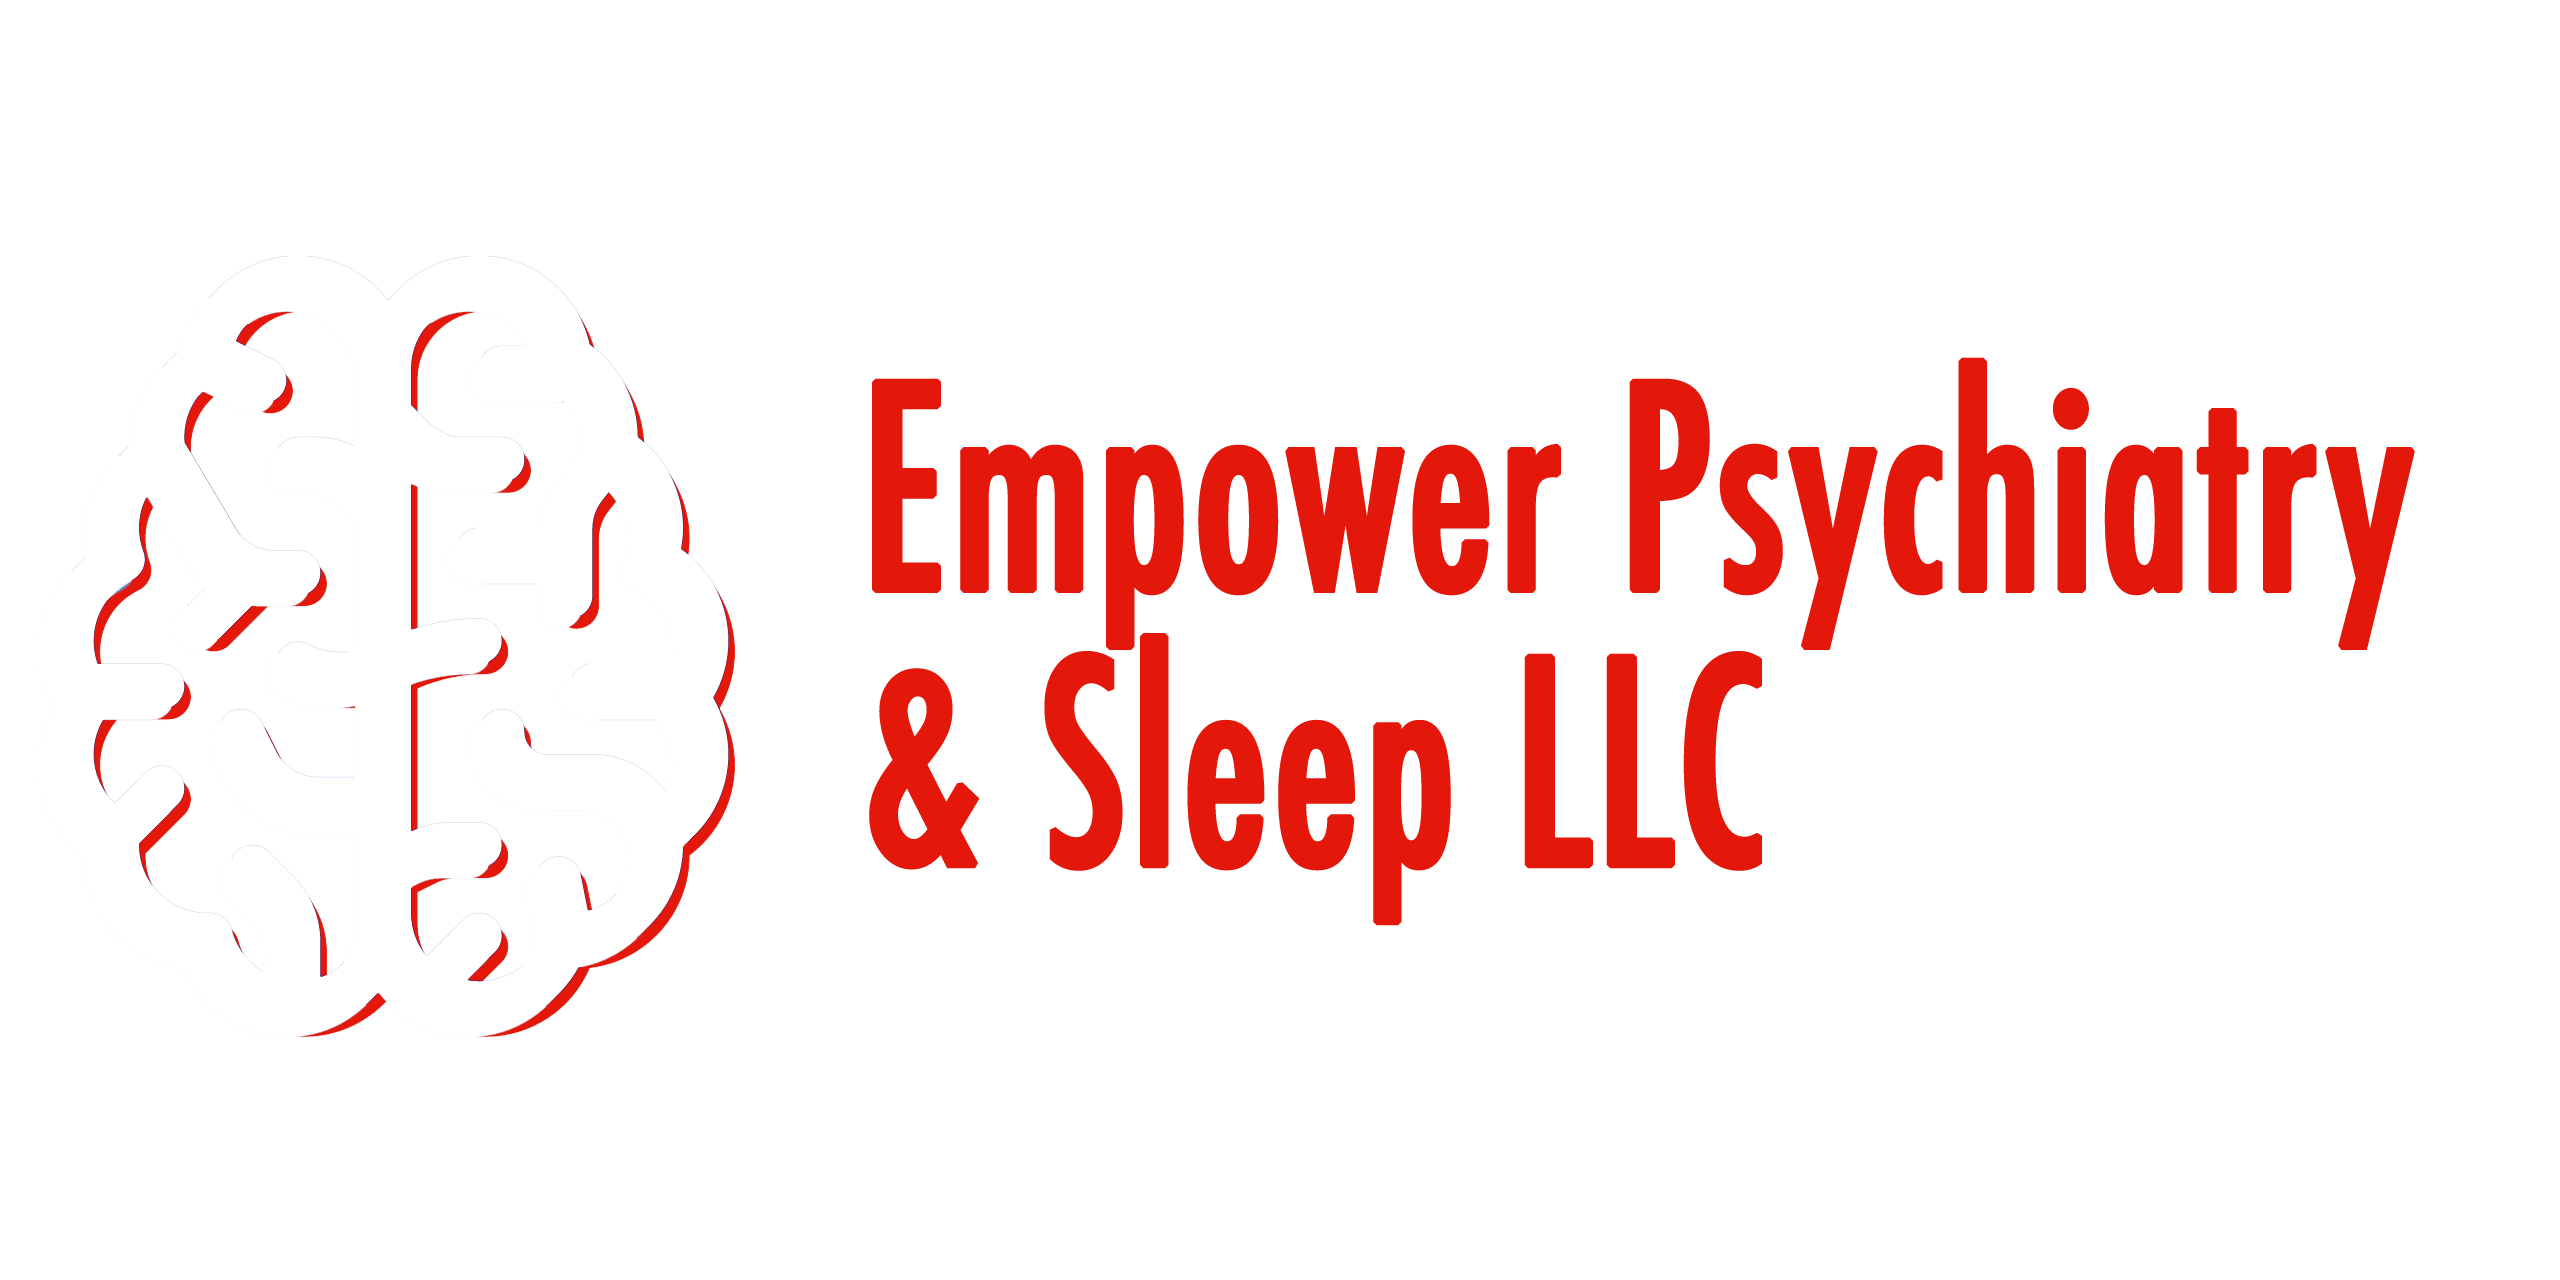 Empower Psychiatry & Sleep LLC logo with a black outline of a brain highlighted in red, with the company name in red font.